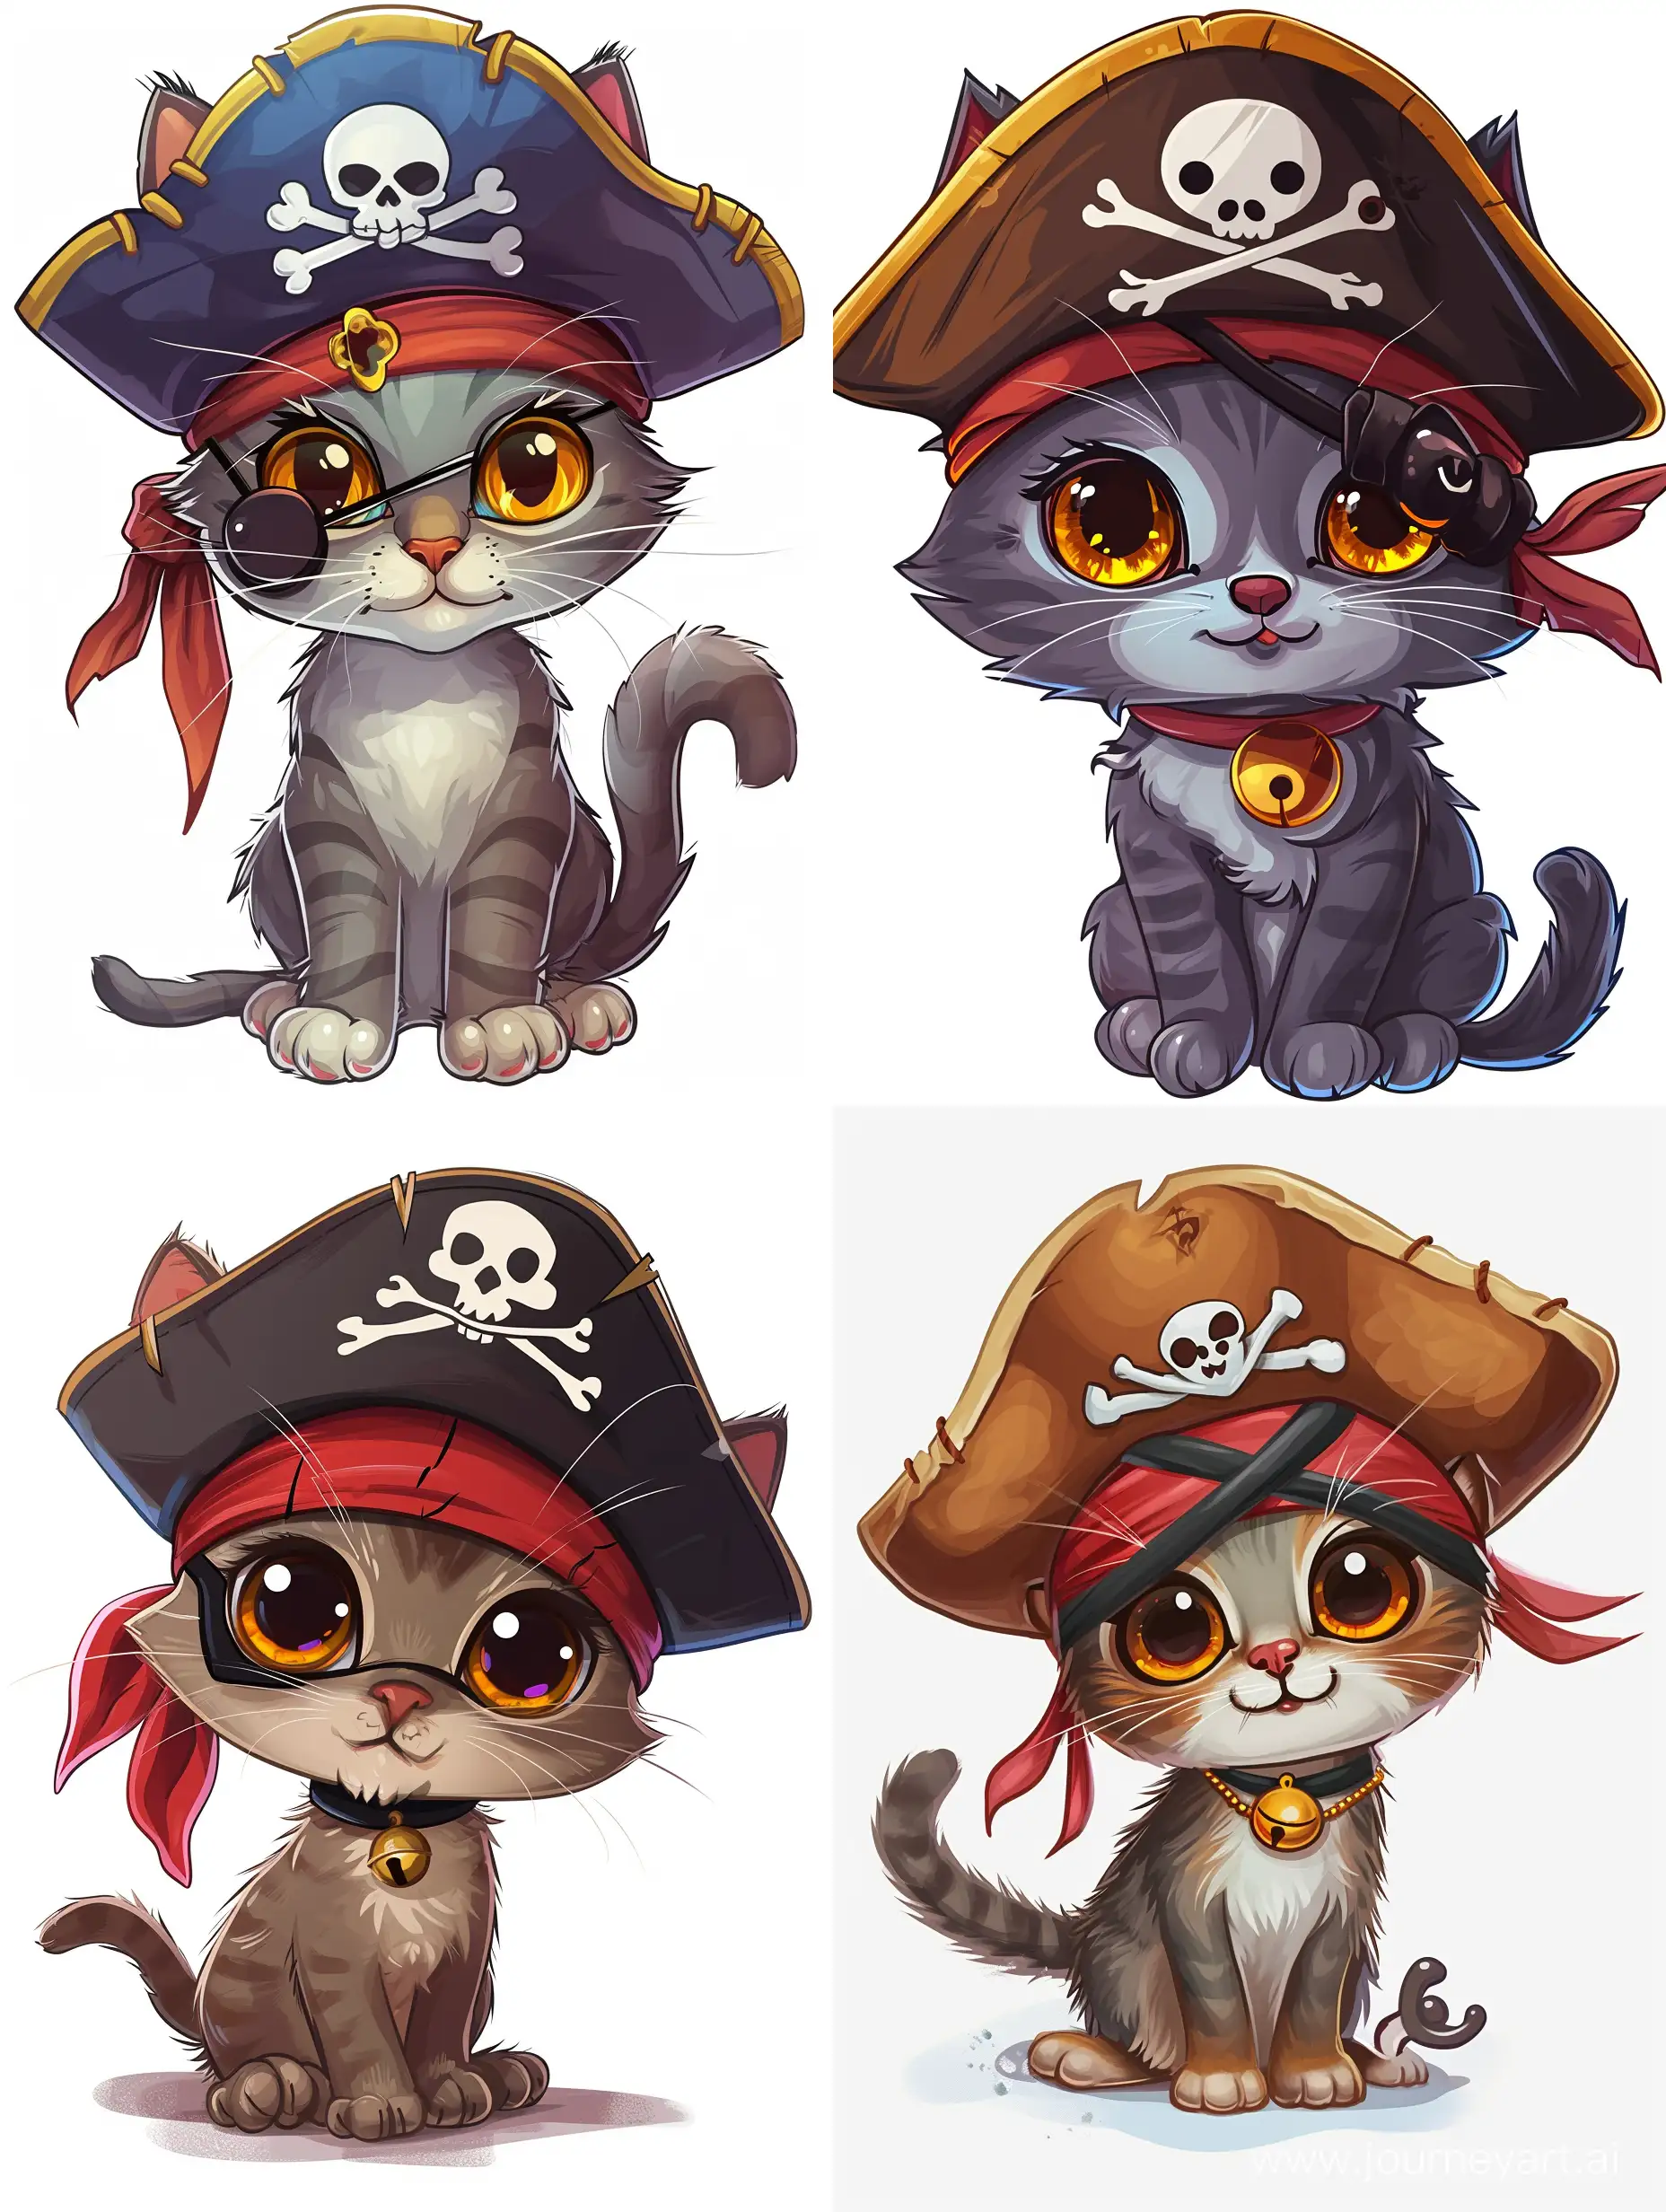 Adorable-Gray-Pirate-Cat-with-Amber-Eyes-and-Hat-in-HD-Cartoon-Image